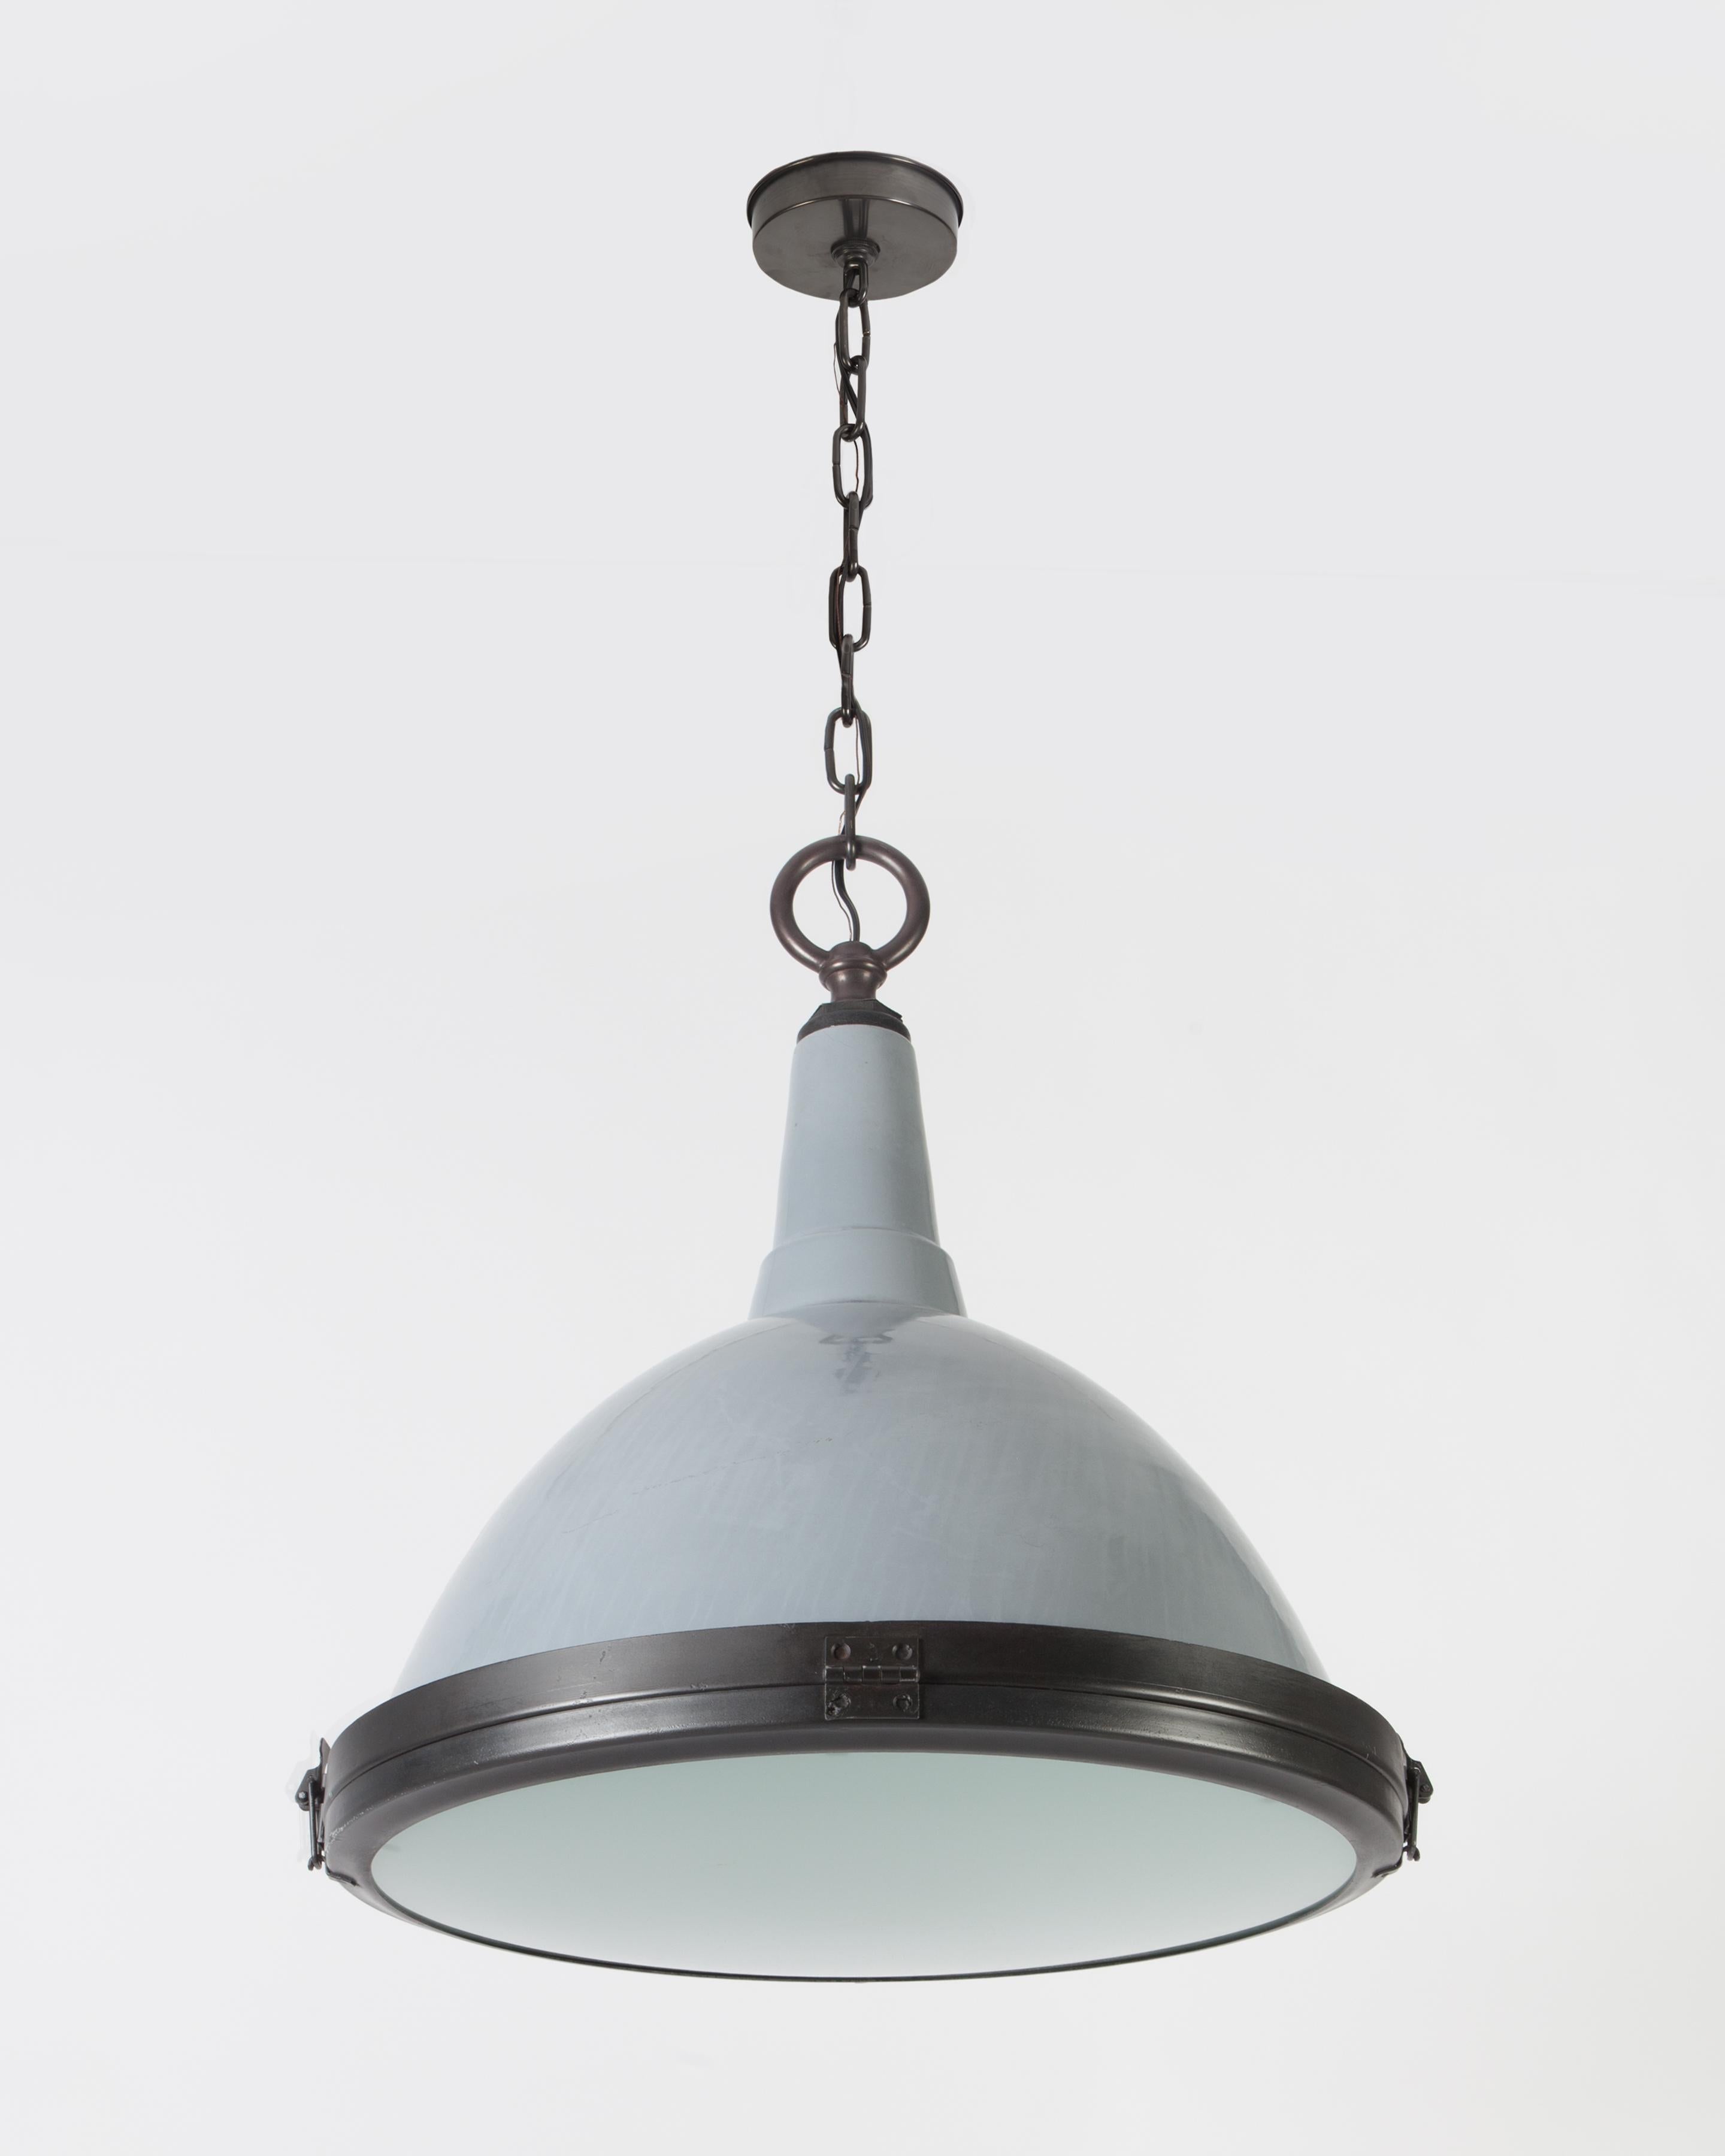 North American Industrial Enameled Pendant with Darkened Brass and Steel Fittings, circa 1950